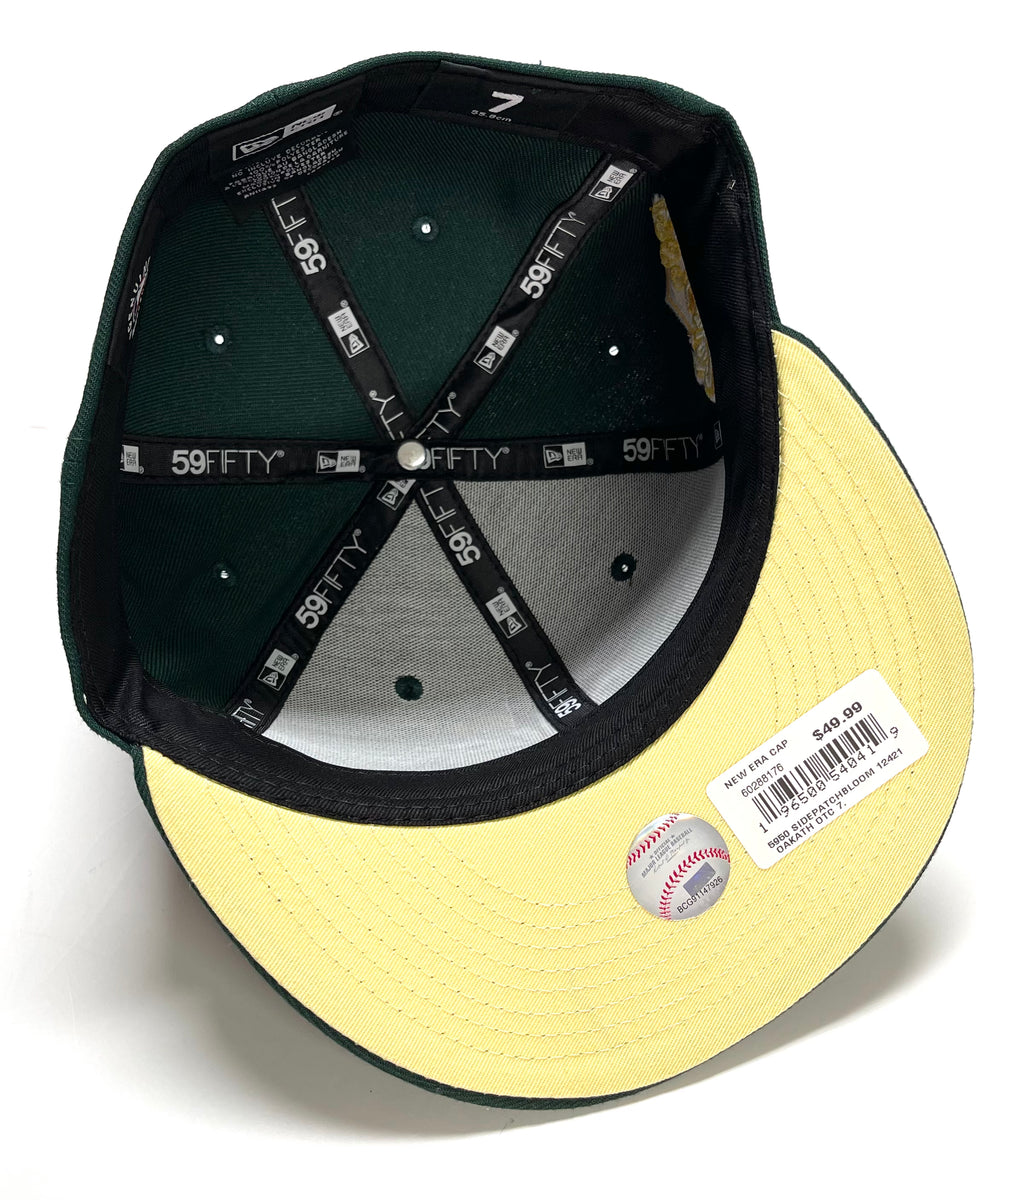 NEW ERA SIDEPATCH BLOOM OAKLAND A'S FITTED HAT (DARK GREEN/YELLOW) – So  Fresh Clothing